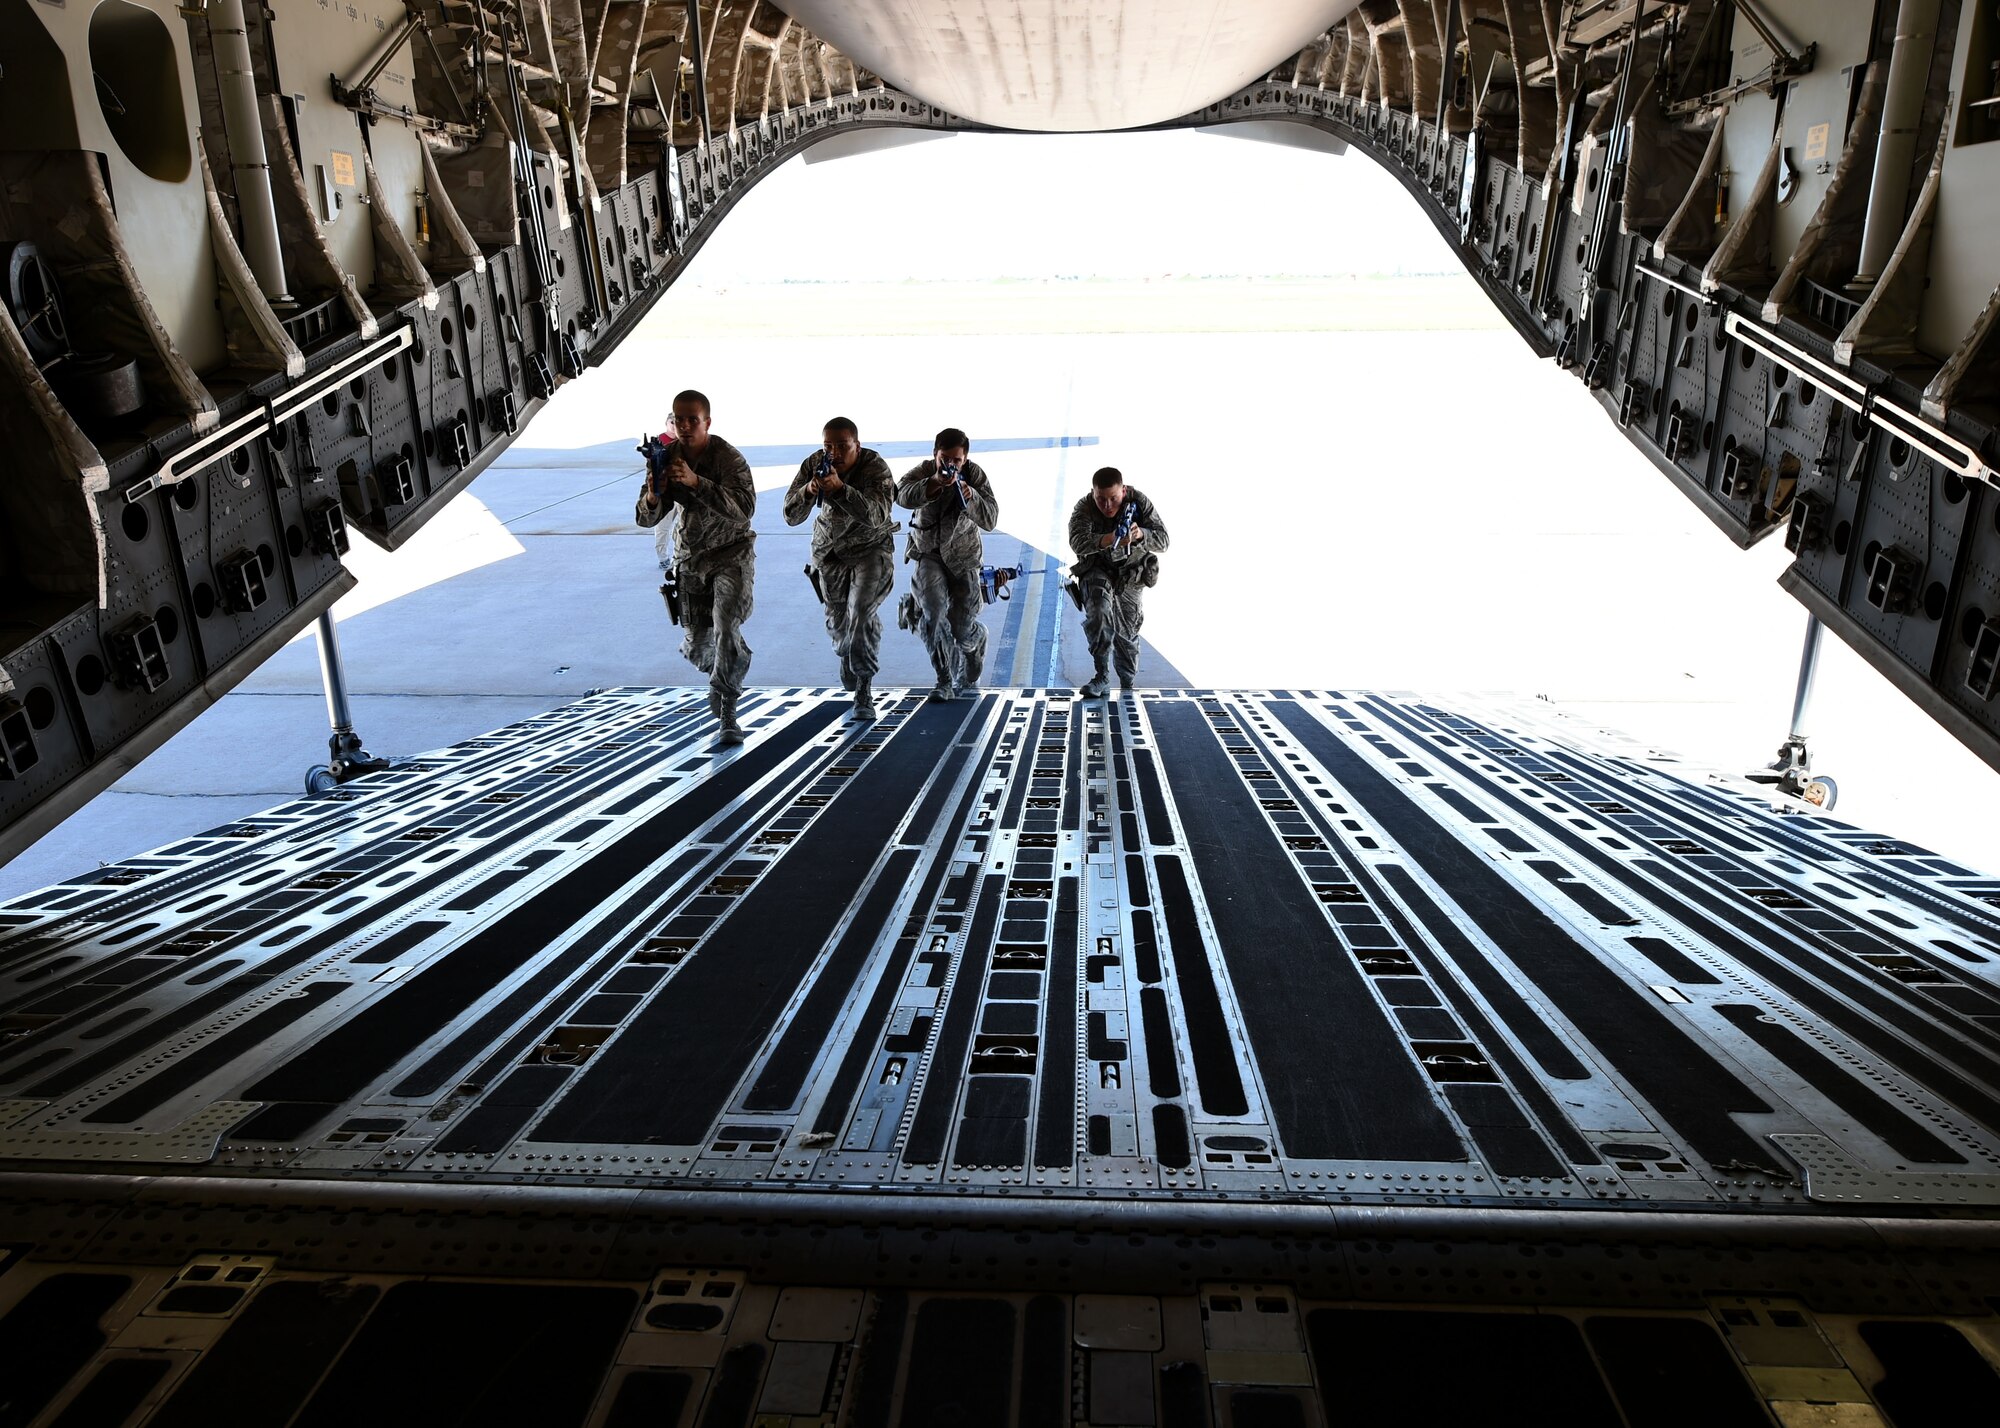 Members of the 97th Security Forces Squadron practice clearing a U.S. Air Force C-17 Globemaster III cargo aircraft during training on Sept. 16, 2016, Altus Air Force Base, Okla. 97th SFS Airmen participated in a week-long training course that taught hand-to-hand defensive and subduing techniques, weapons handling and clearing and securing buildings, aircraft and buses as a team. (U.S. Air Force photo by Airman 1st Class Kirby Turbak/Released)   